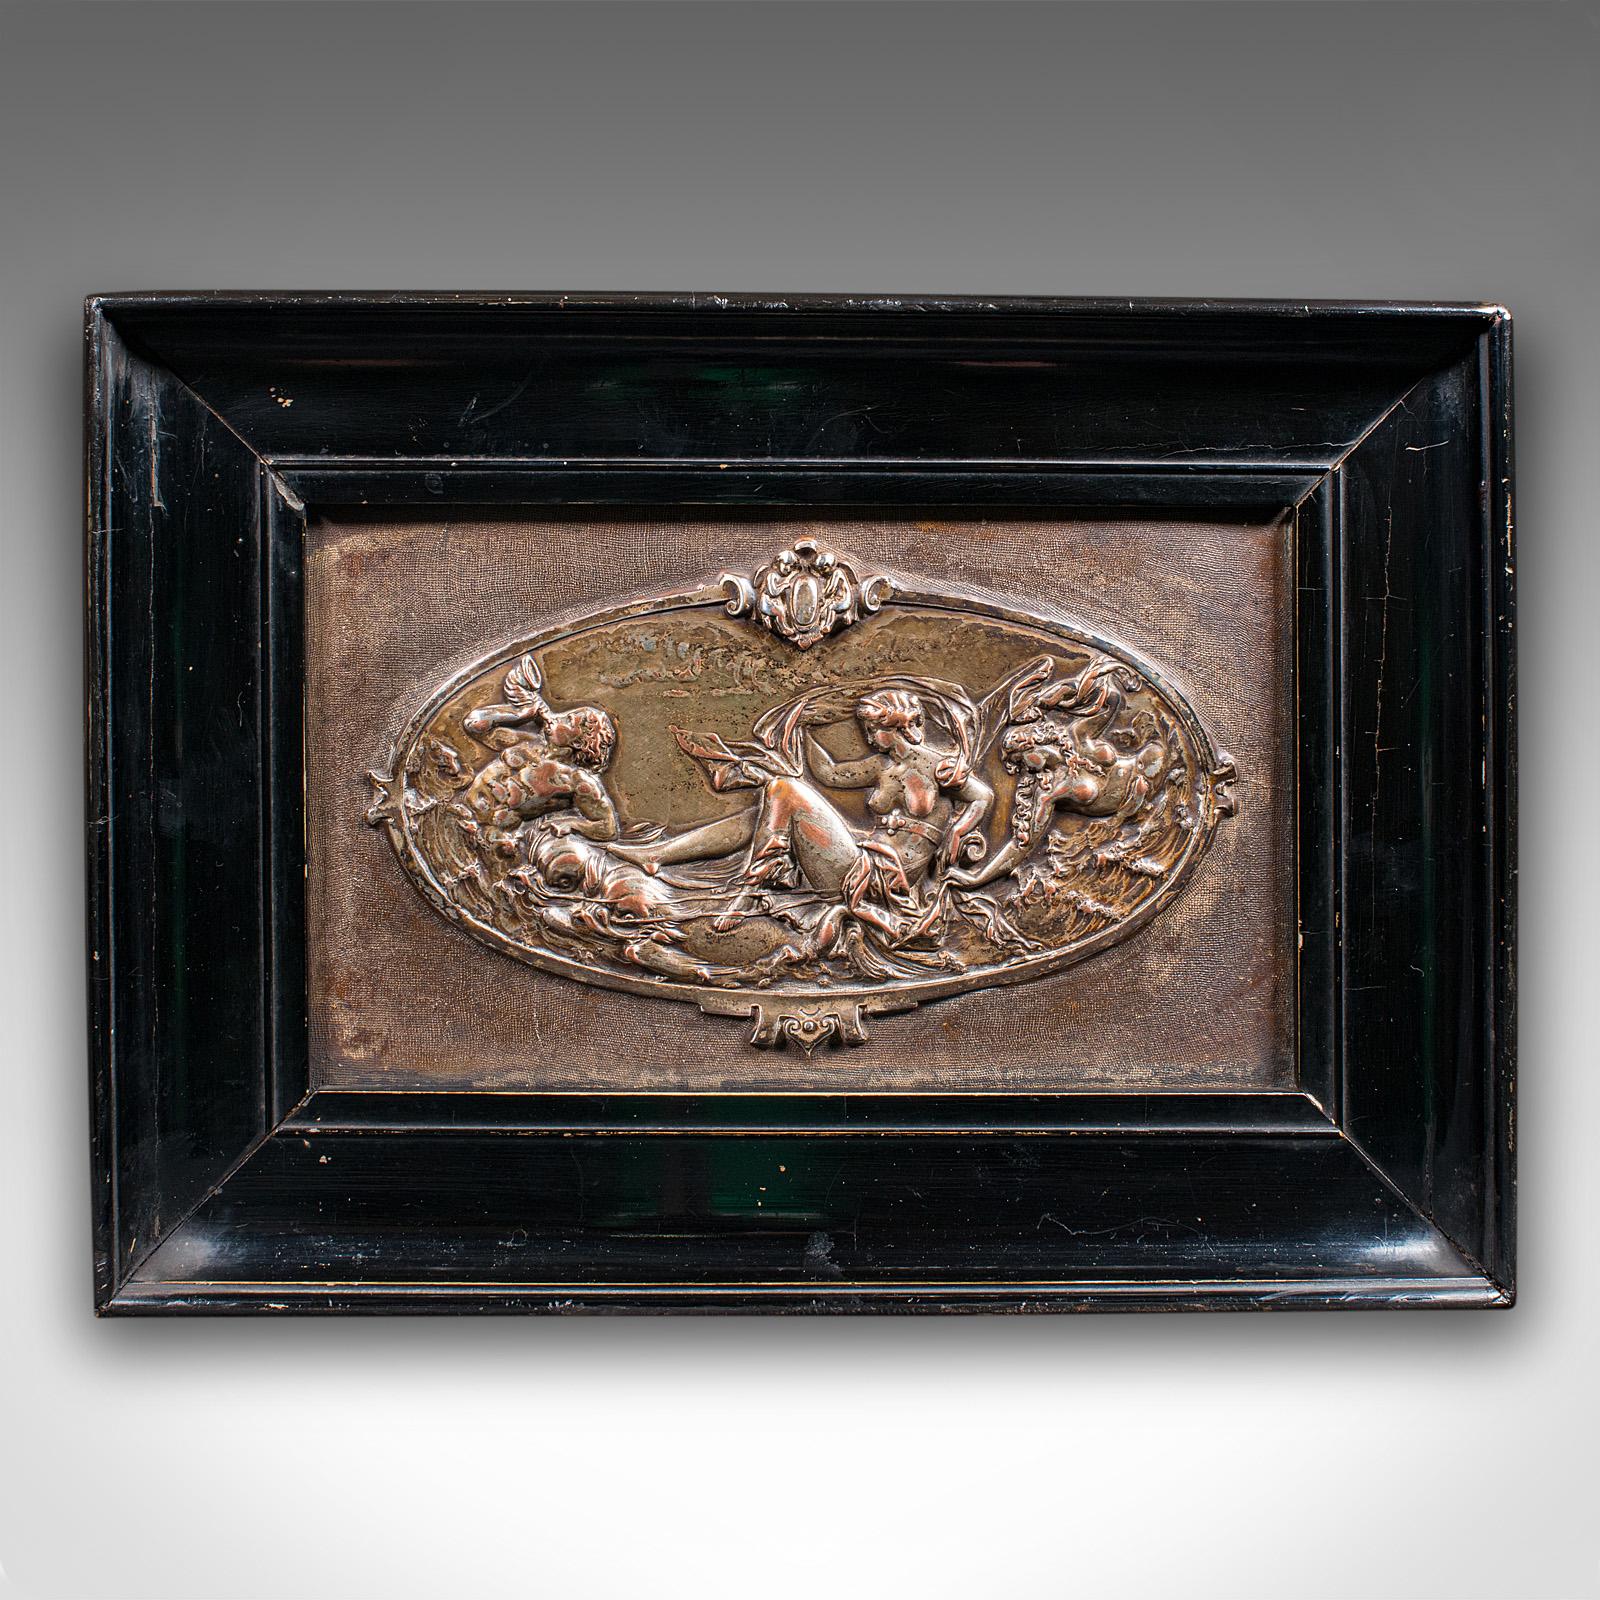 This is an antique classical wall frieze. A Continental, silvered copper Grand Tour relief plaque in later frame, dating to the late Victorian period, circa 1880.

Wonderful classical mythology scene in charming relief
Displays a desirable aged